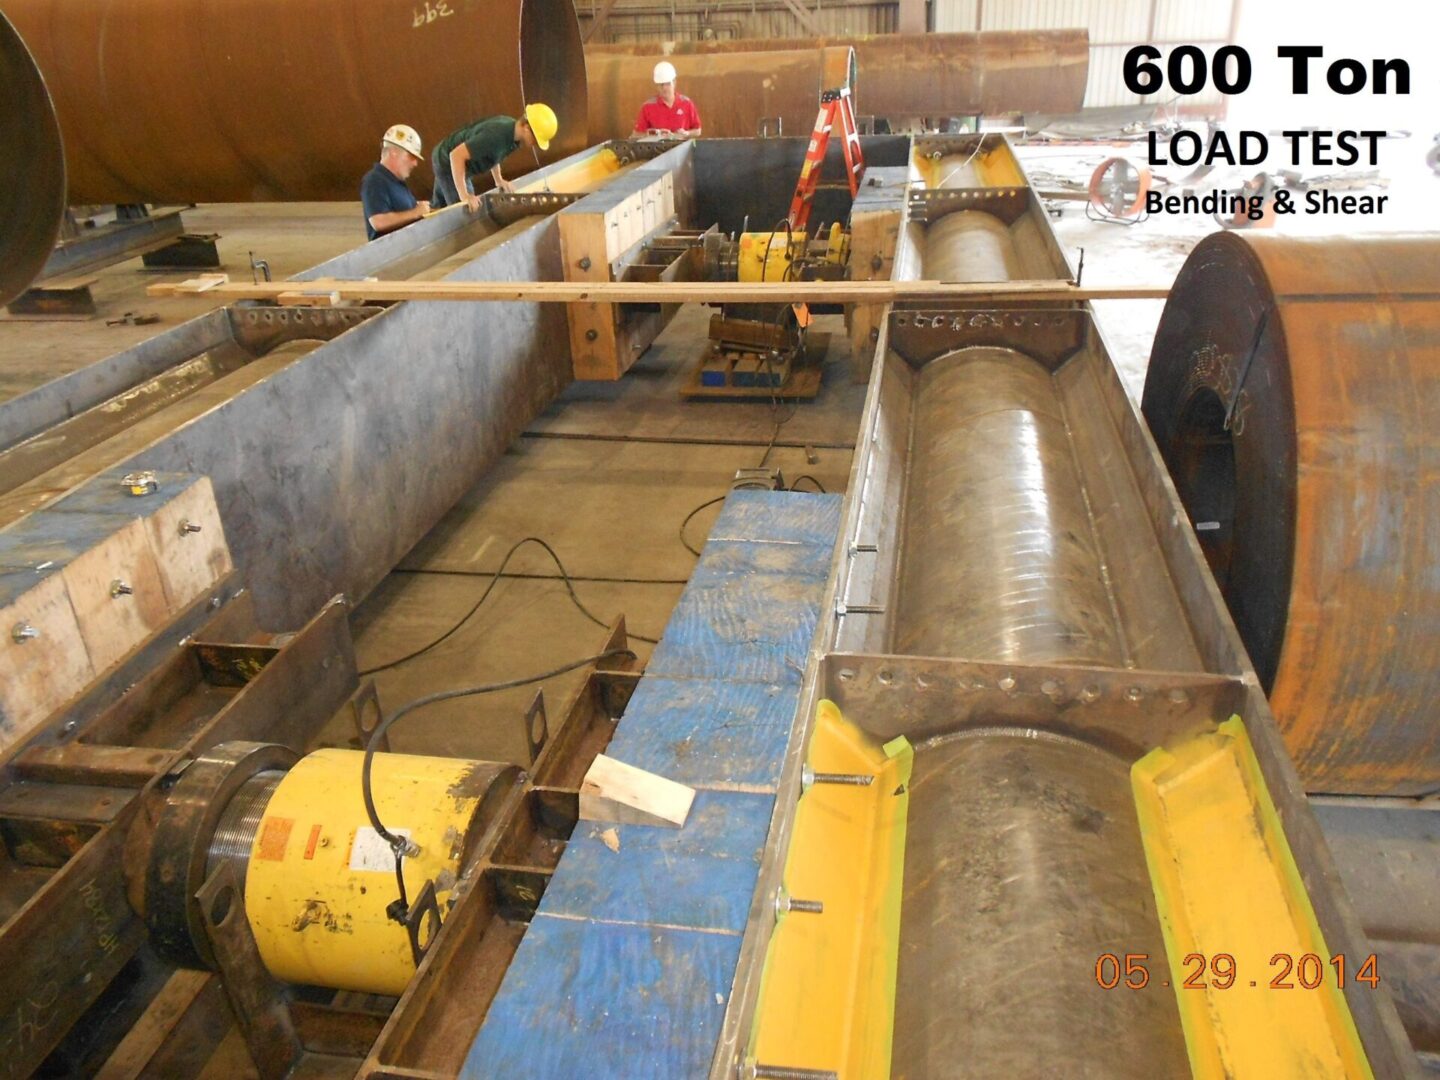 A construction with 600 ton load test